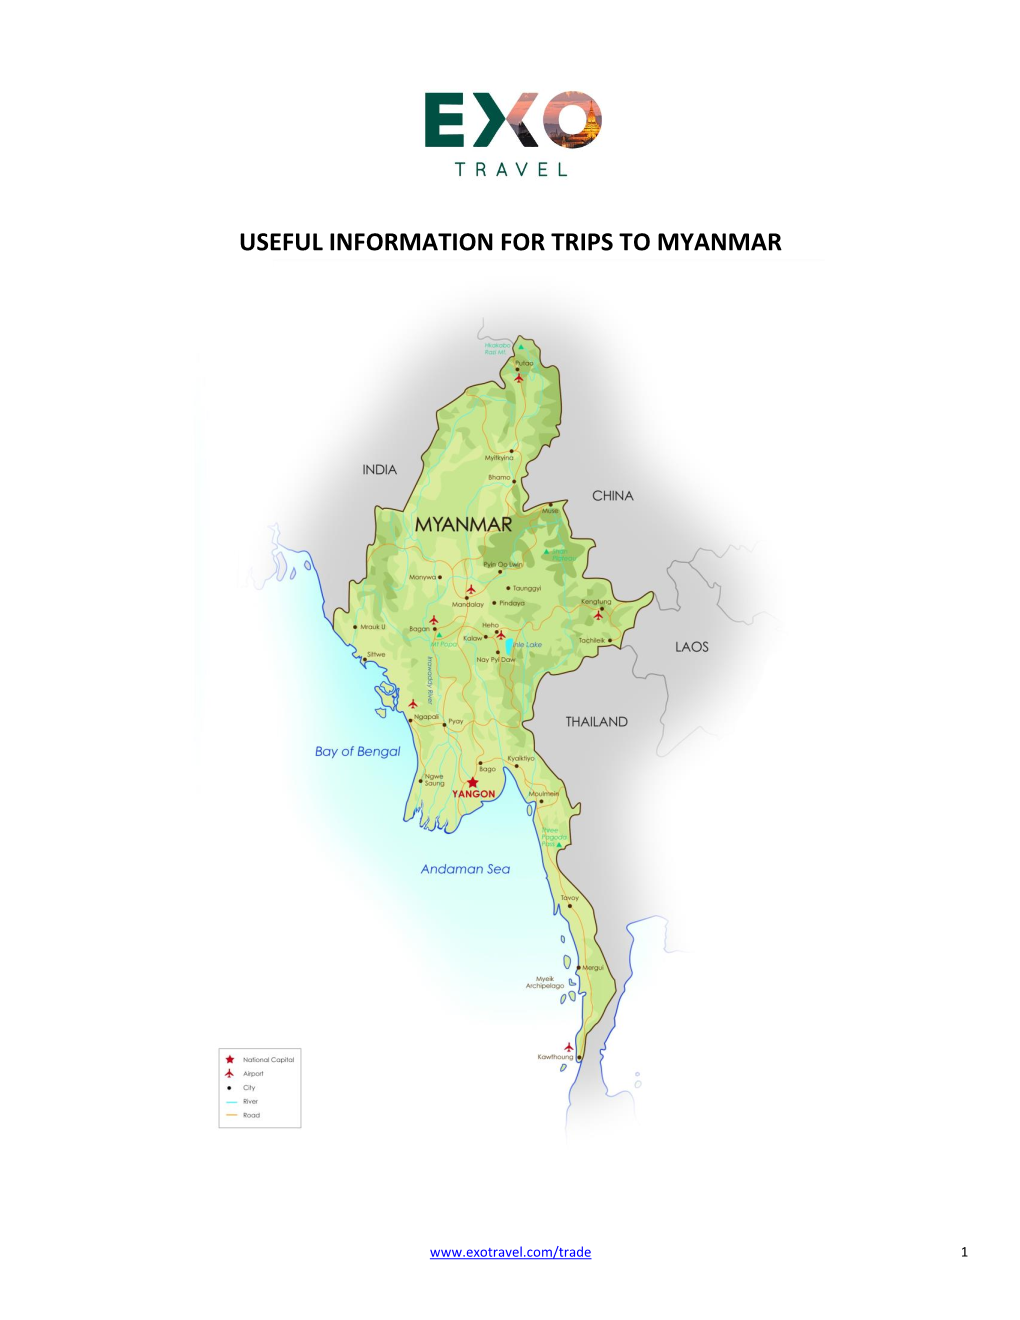 Useful Information for Trips to Myanmar